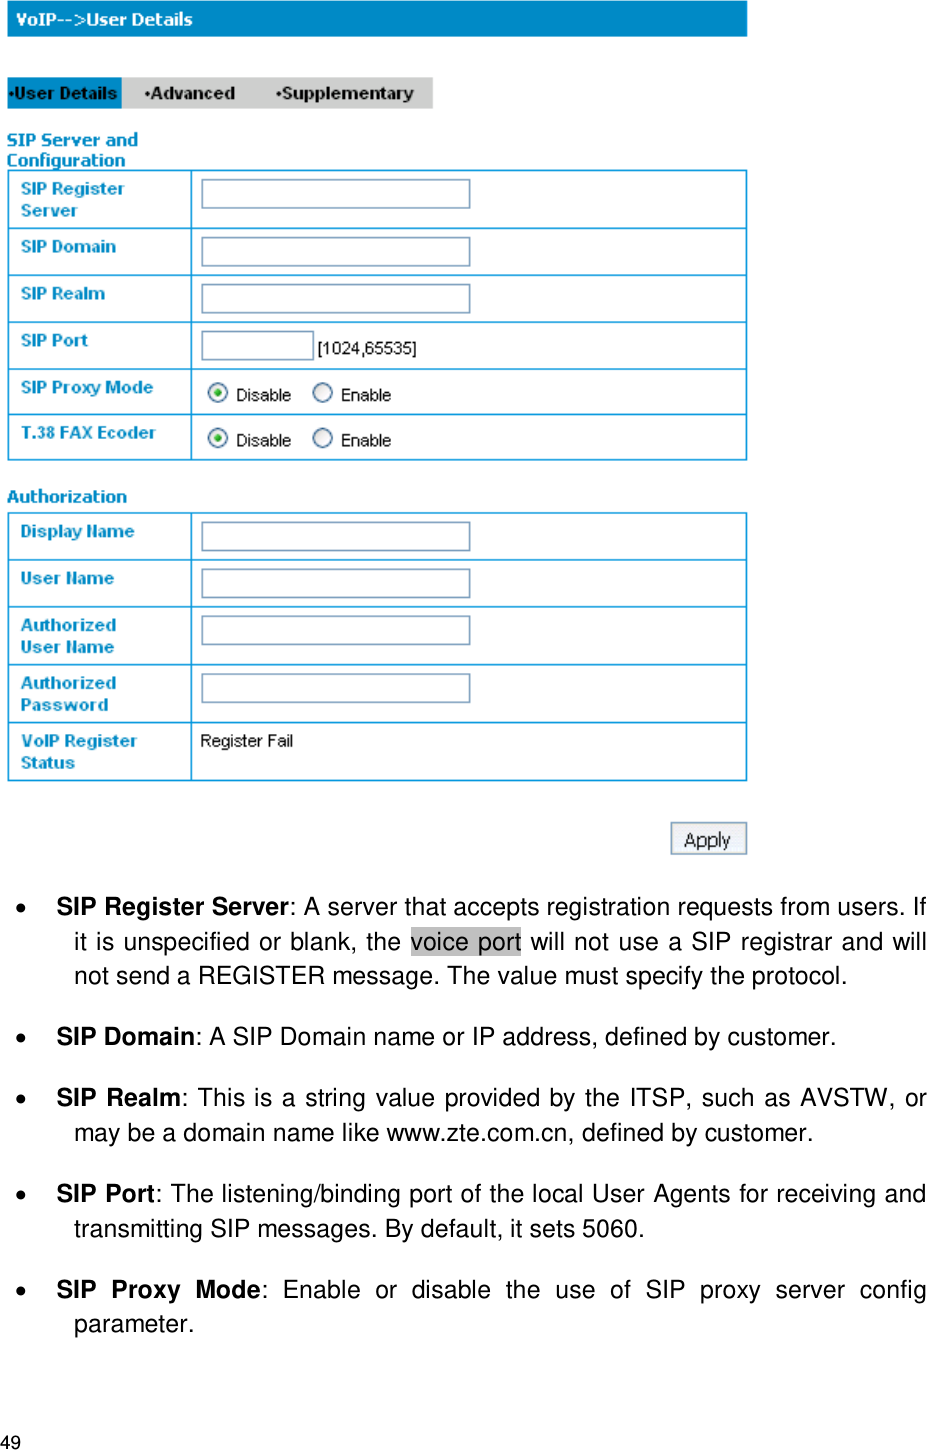 49   SIP Register Server: A server that accepts registration requests from users. If it is unspecified or blank, the voice port will not use a SIP registrar and will not send a REGISTER message. The value must specify the protocol.  SIP Domain: A SIP Domain name or IP address, defined by customer.  SIP Realm: This is a string value provided by the ITSP, such as AVSTW, or may be a domain name like www.zte.com.cn, defined by customer.    SIP Port: The listening/binding port of the local User Agents for receiving and transmitting SIP messages. By default, it sets 5060.  SIP  Proxy  Mode:  Enable  or  disable  the  use  of  SIP  proxy  server  config parameter.   